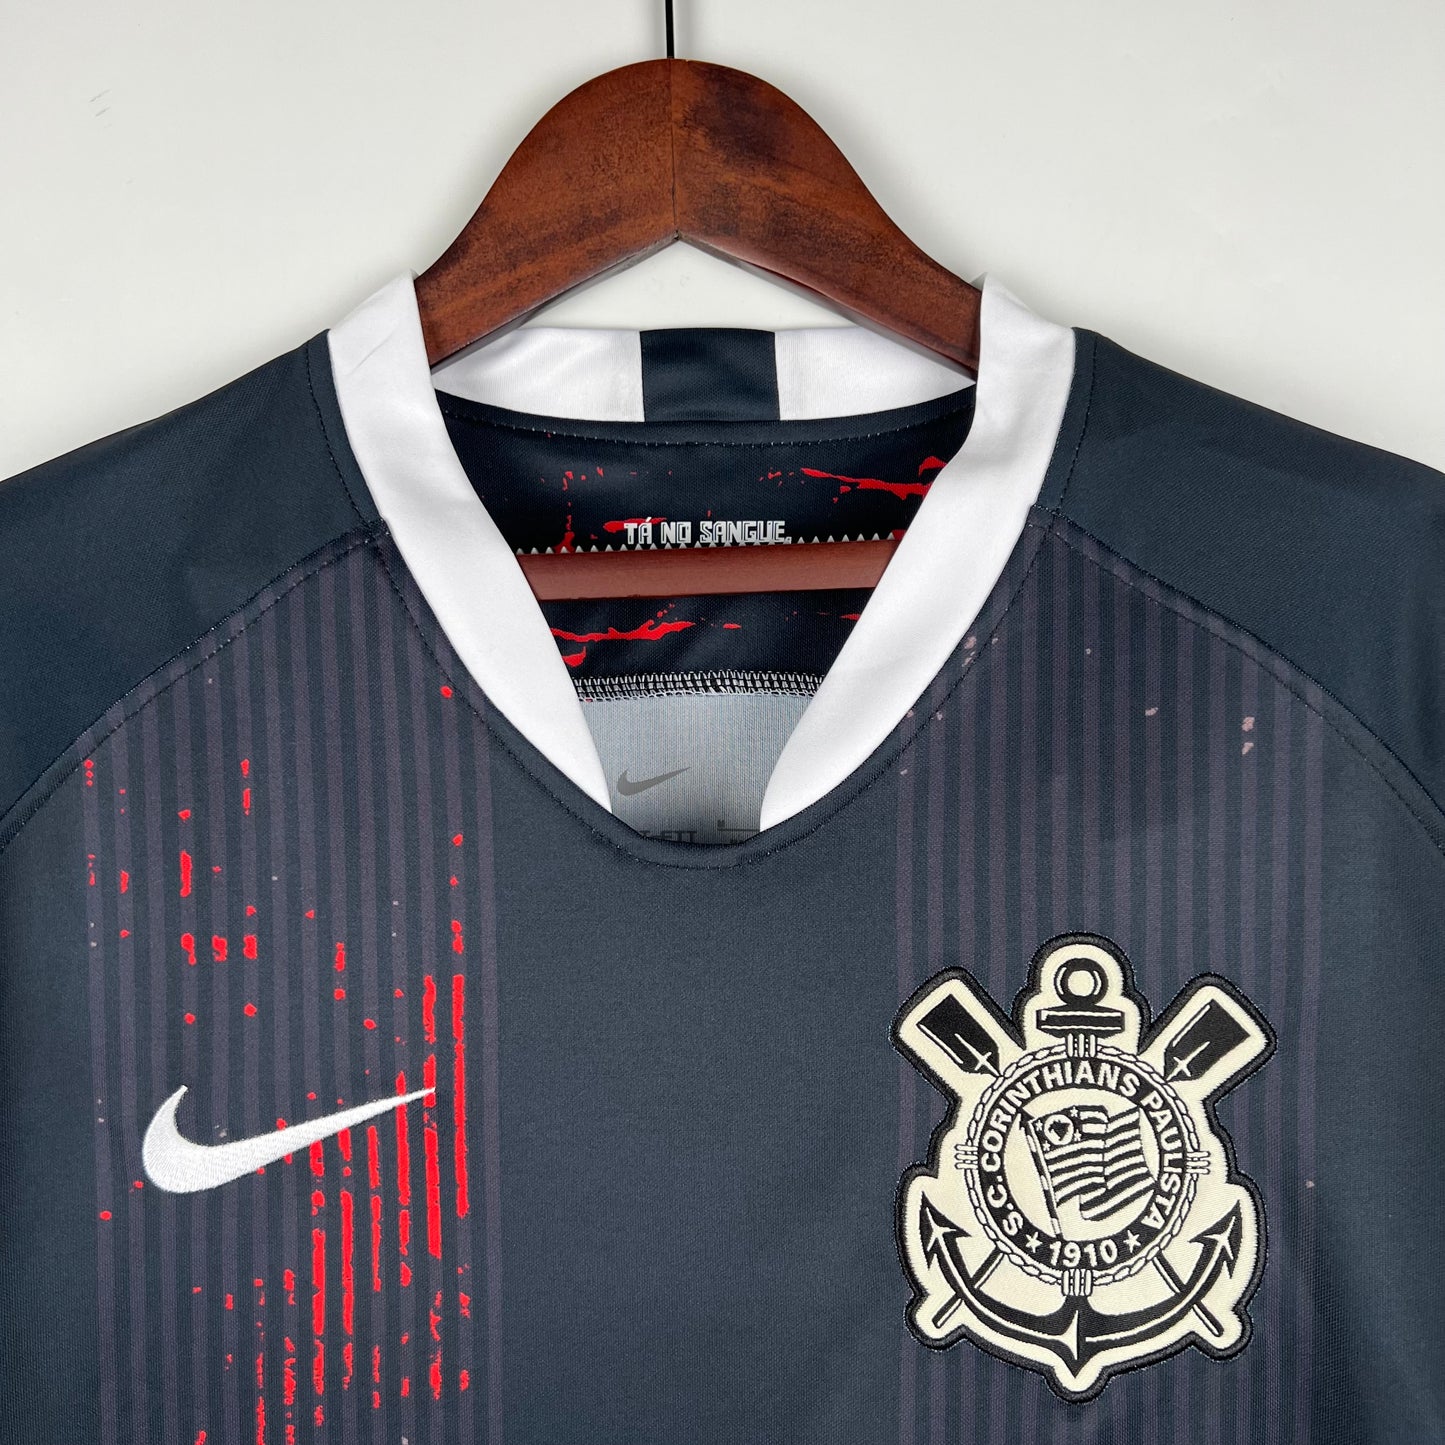 Corinthians 23/24 Special Edition Jersey